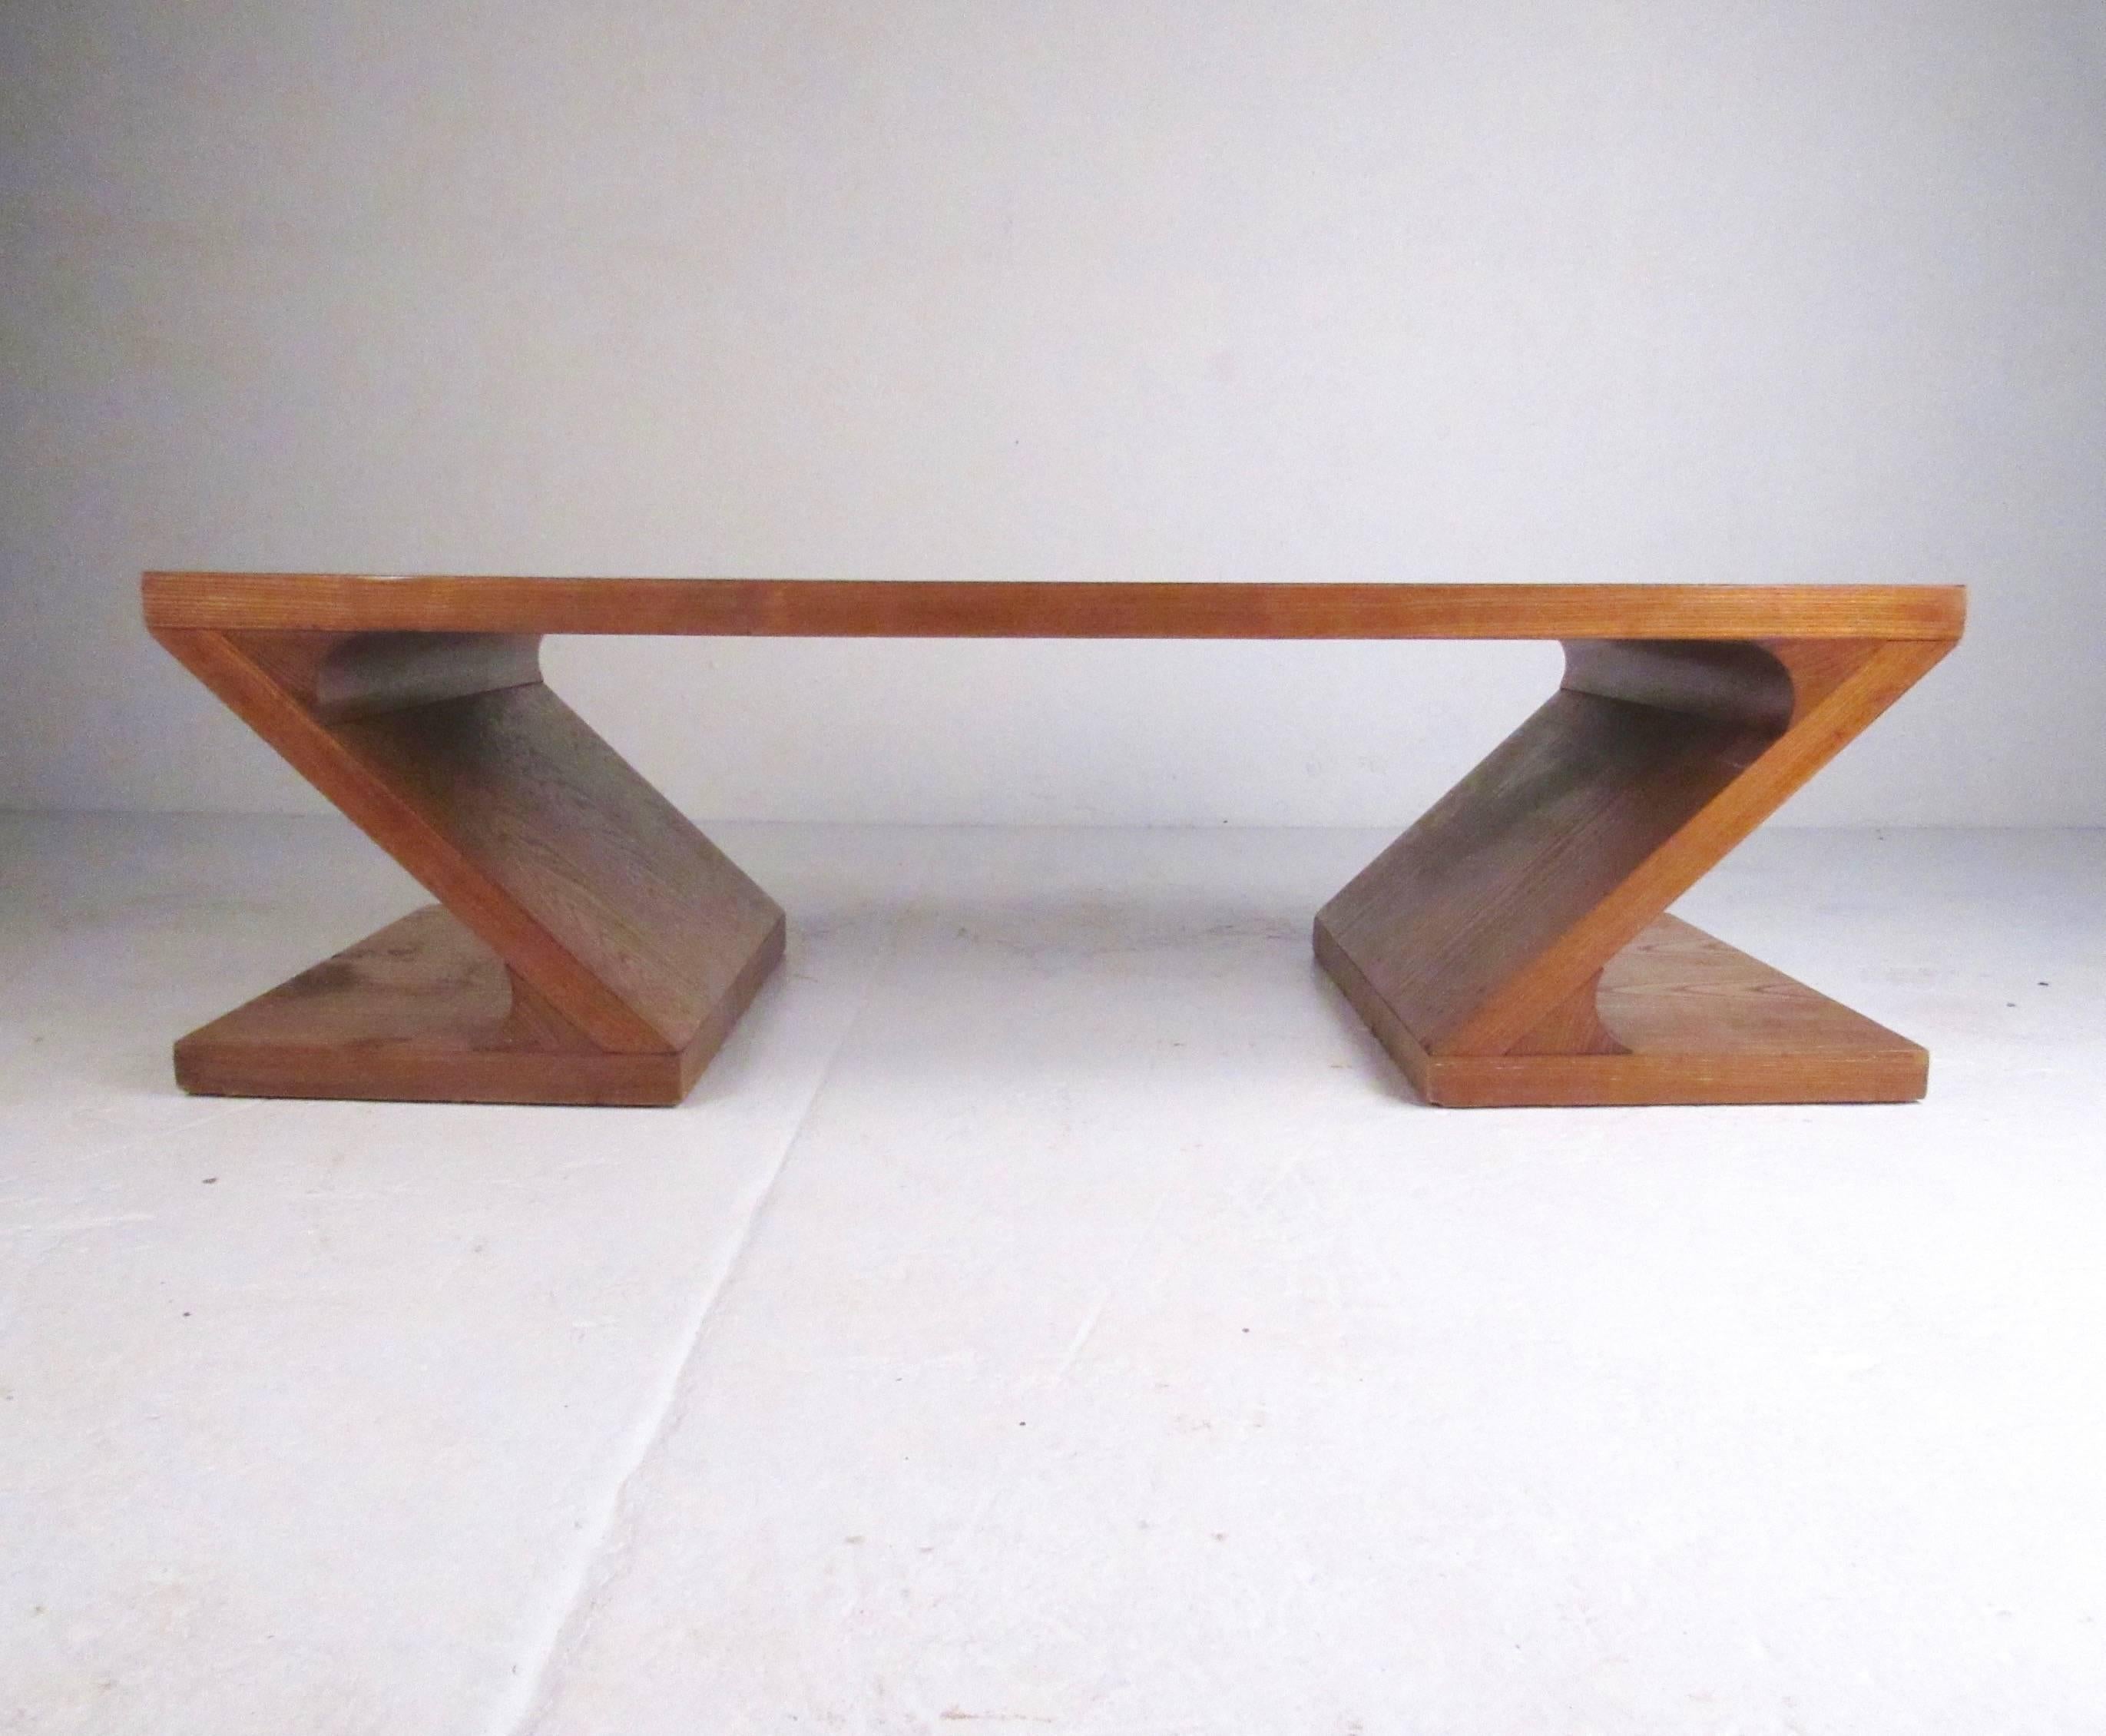 This uniquely shaped vintage modern coffee table by Lane features two-tone oak marquetry with stylish Z type design. The vintage modern appeal of the coffee table makes it an impressive addition to any seating area. Pair of matching end tables also